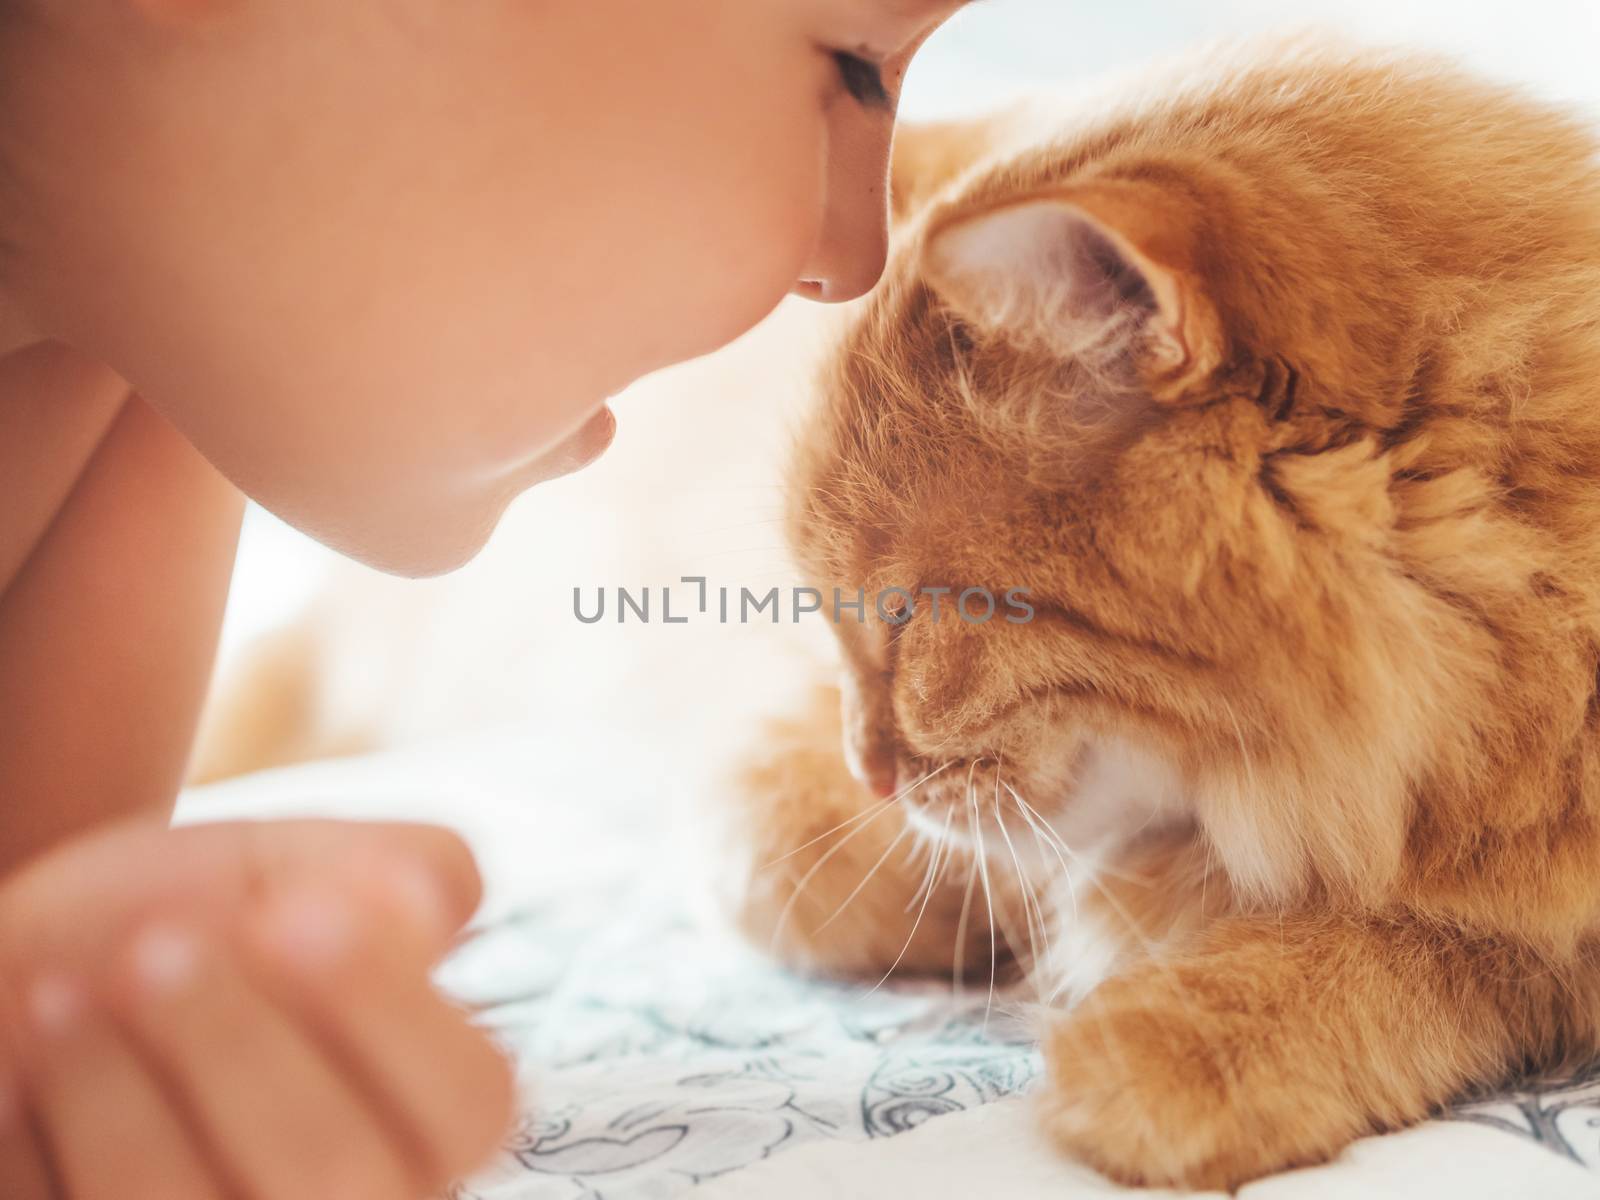 Cute ginger cat and child snuggle. Kid and fluffy pet. Faces of little boy and fuzzy domestic animal. Morning bedtime.